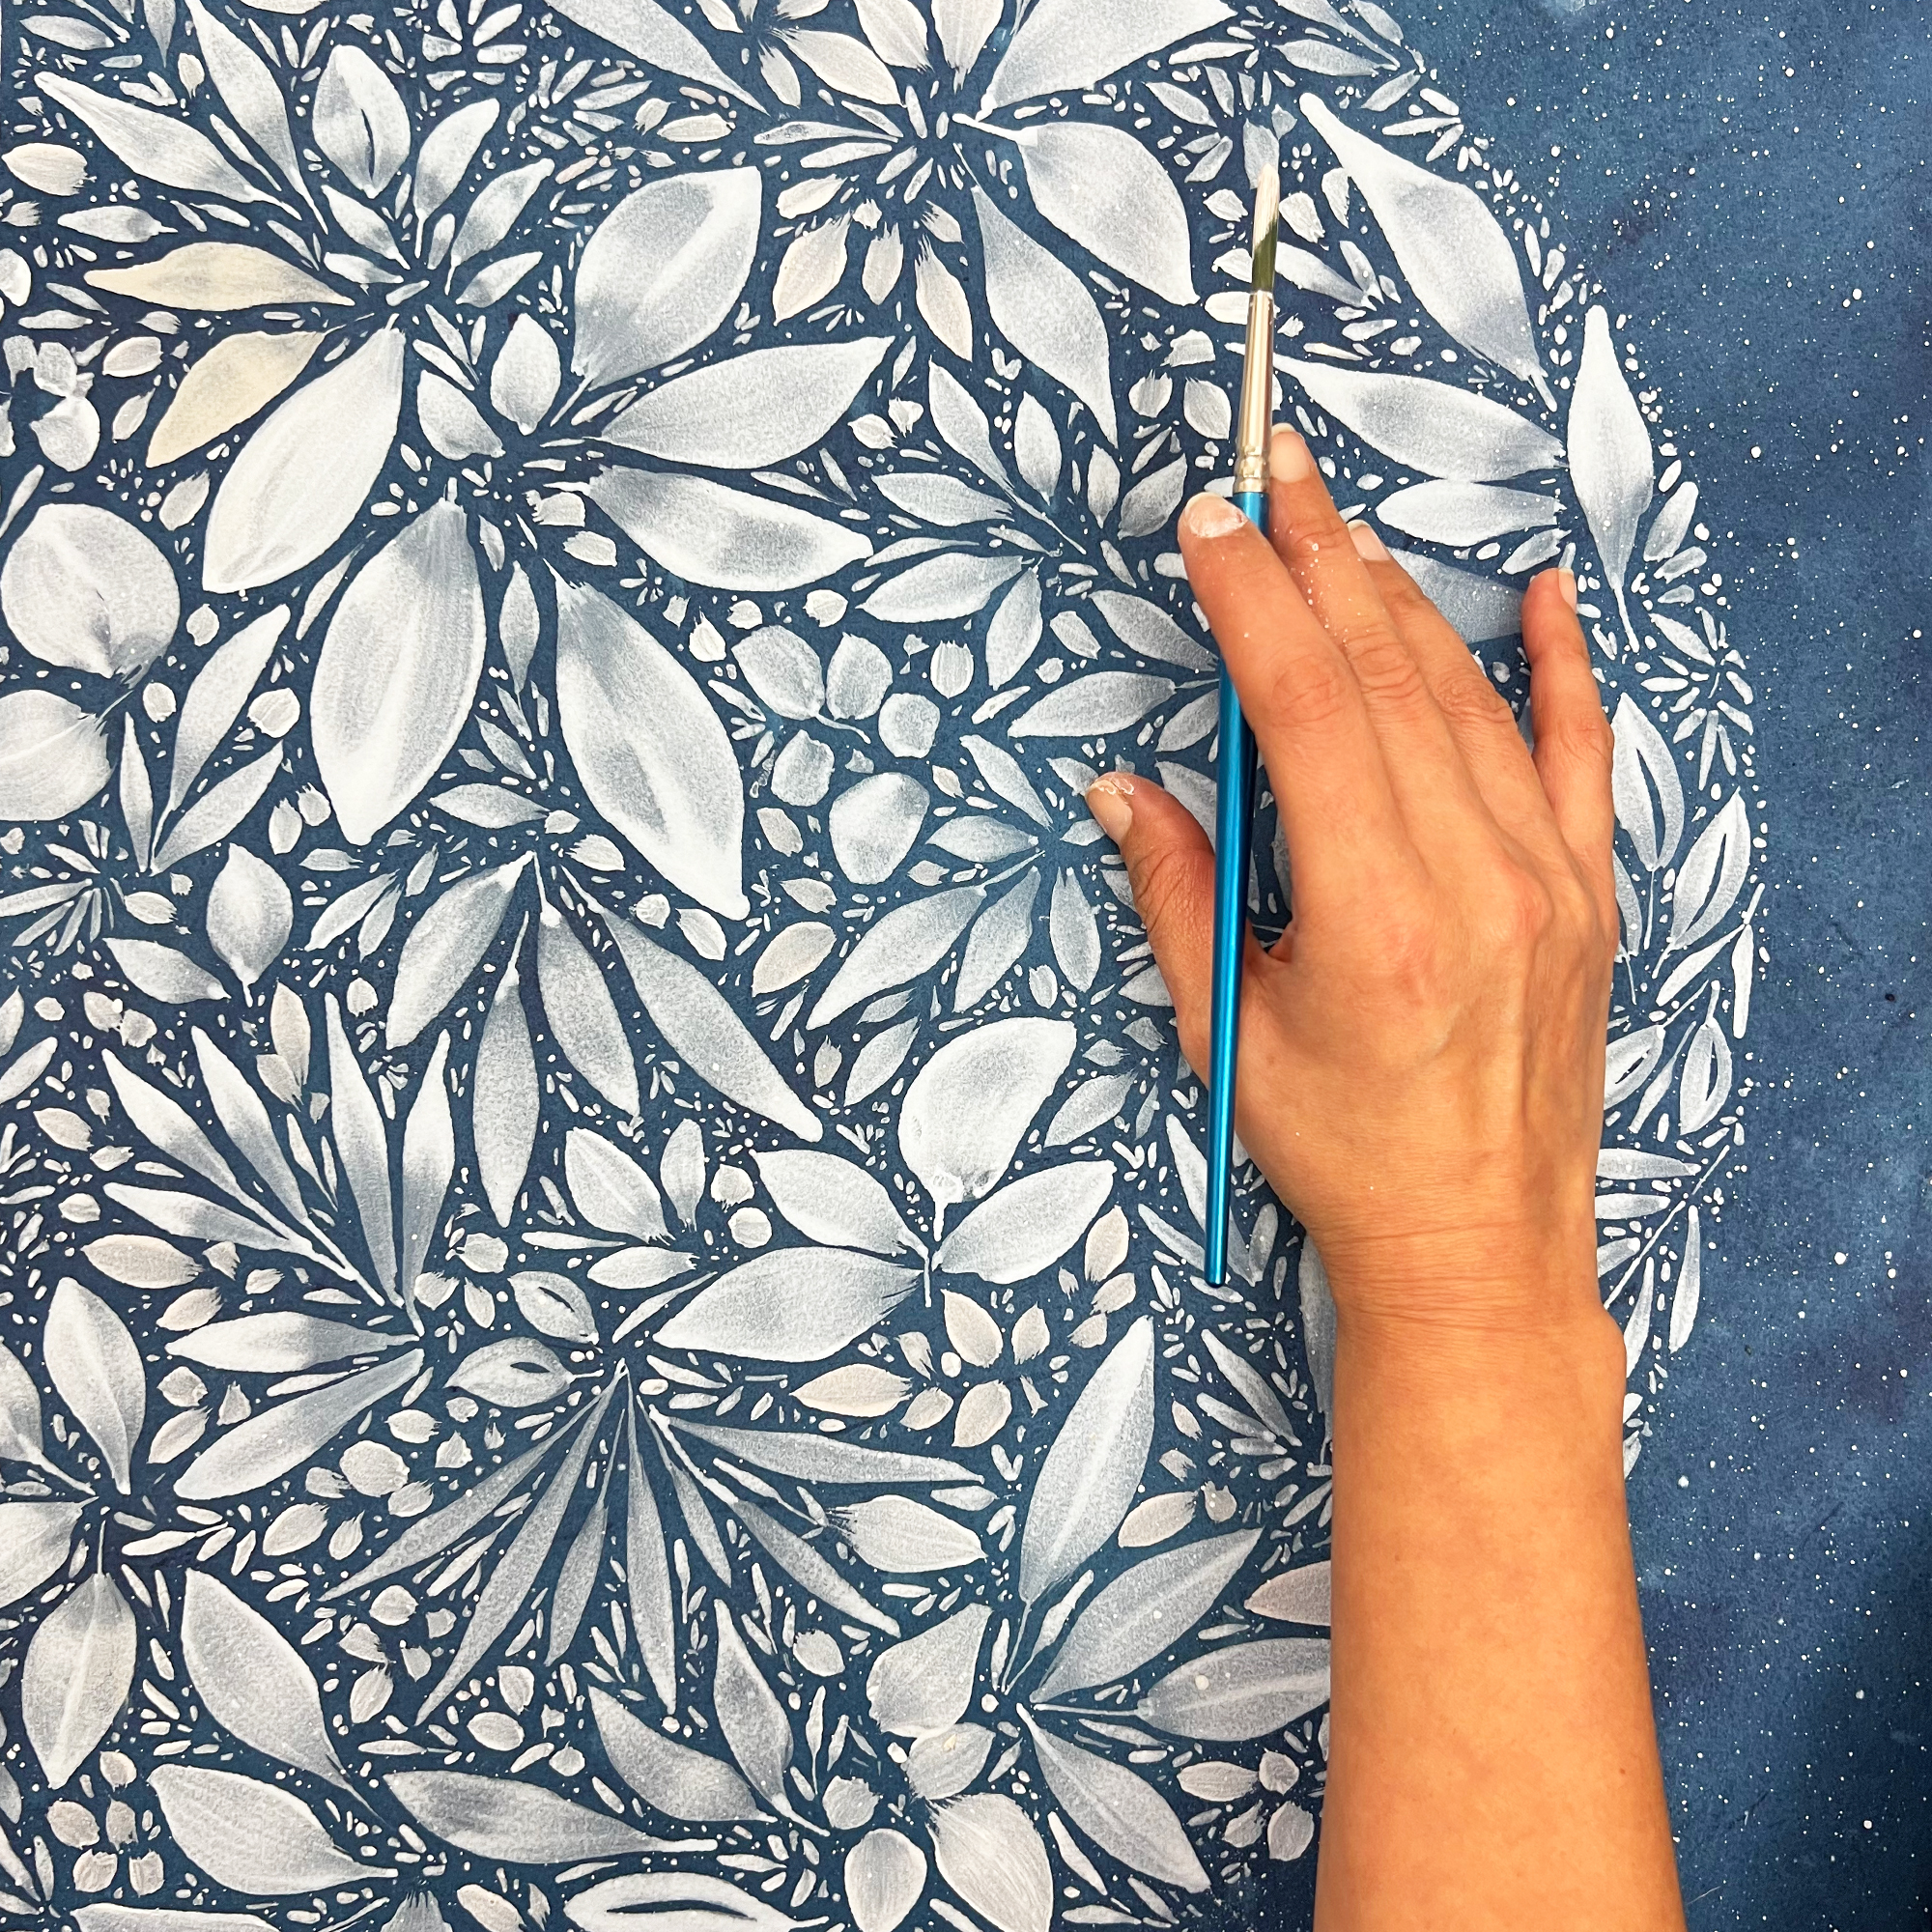 Botanical moon painting online tutorial, watercolor and acrylic.